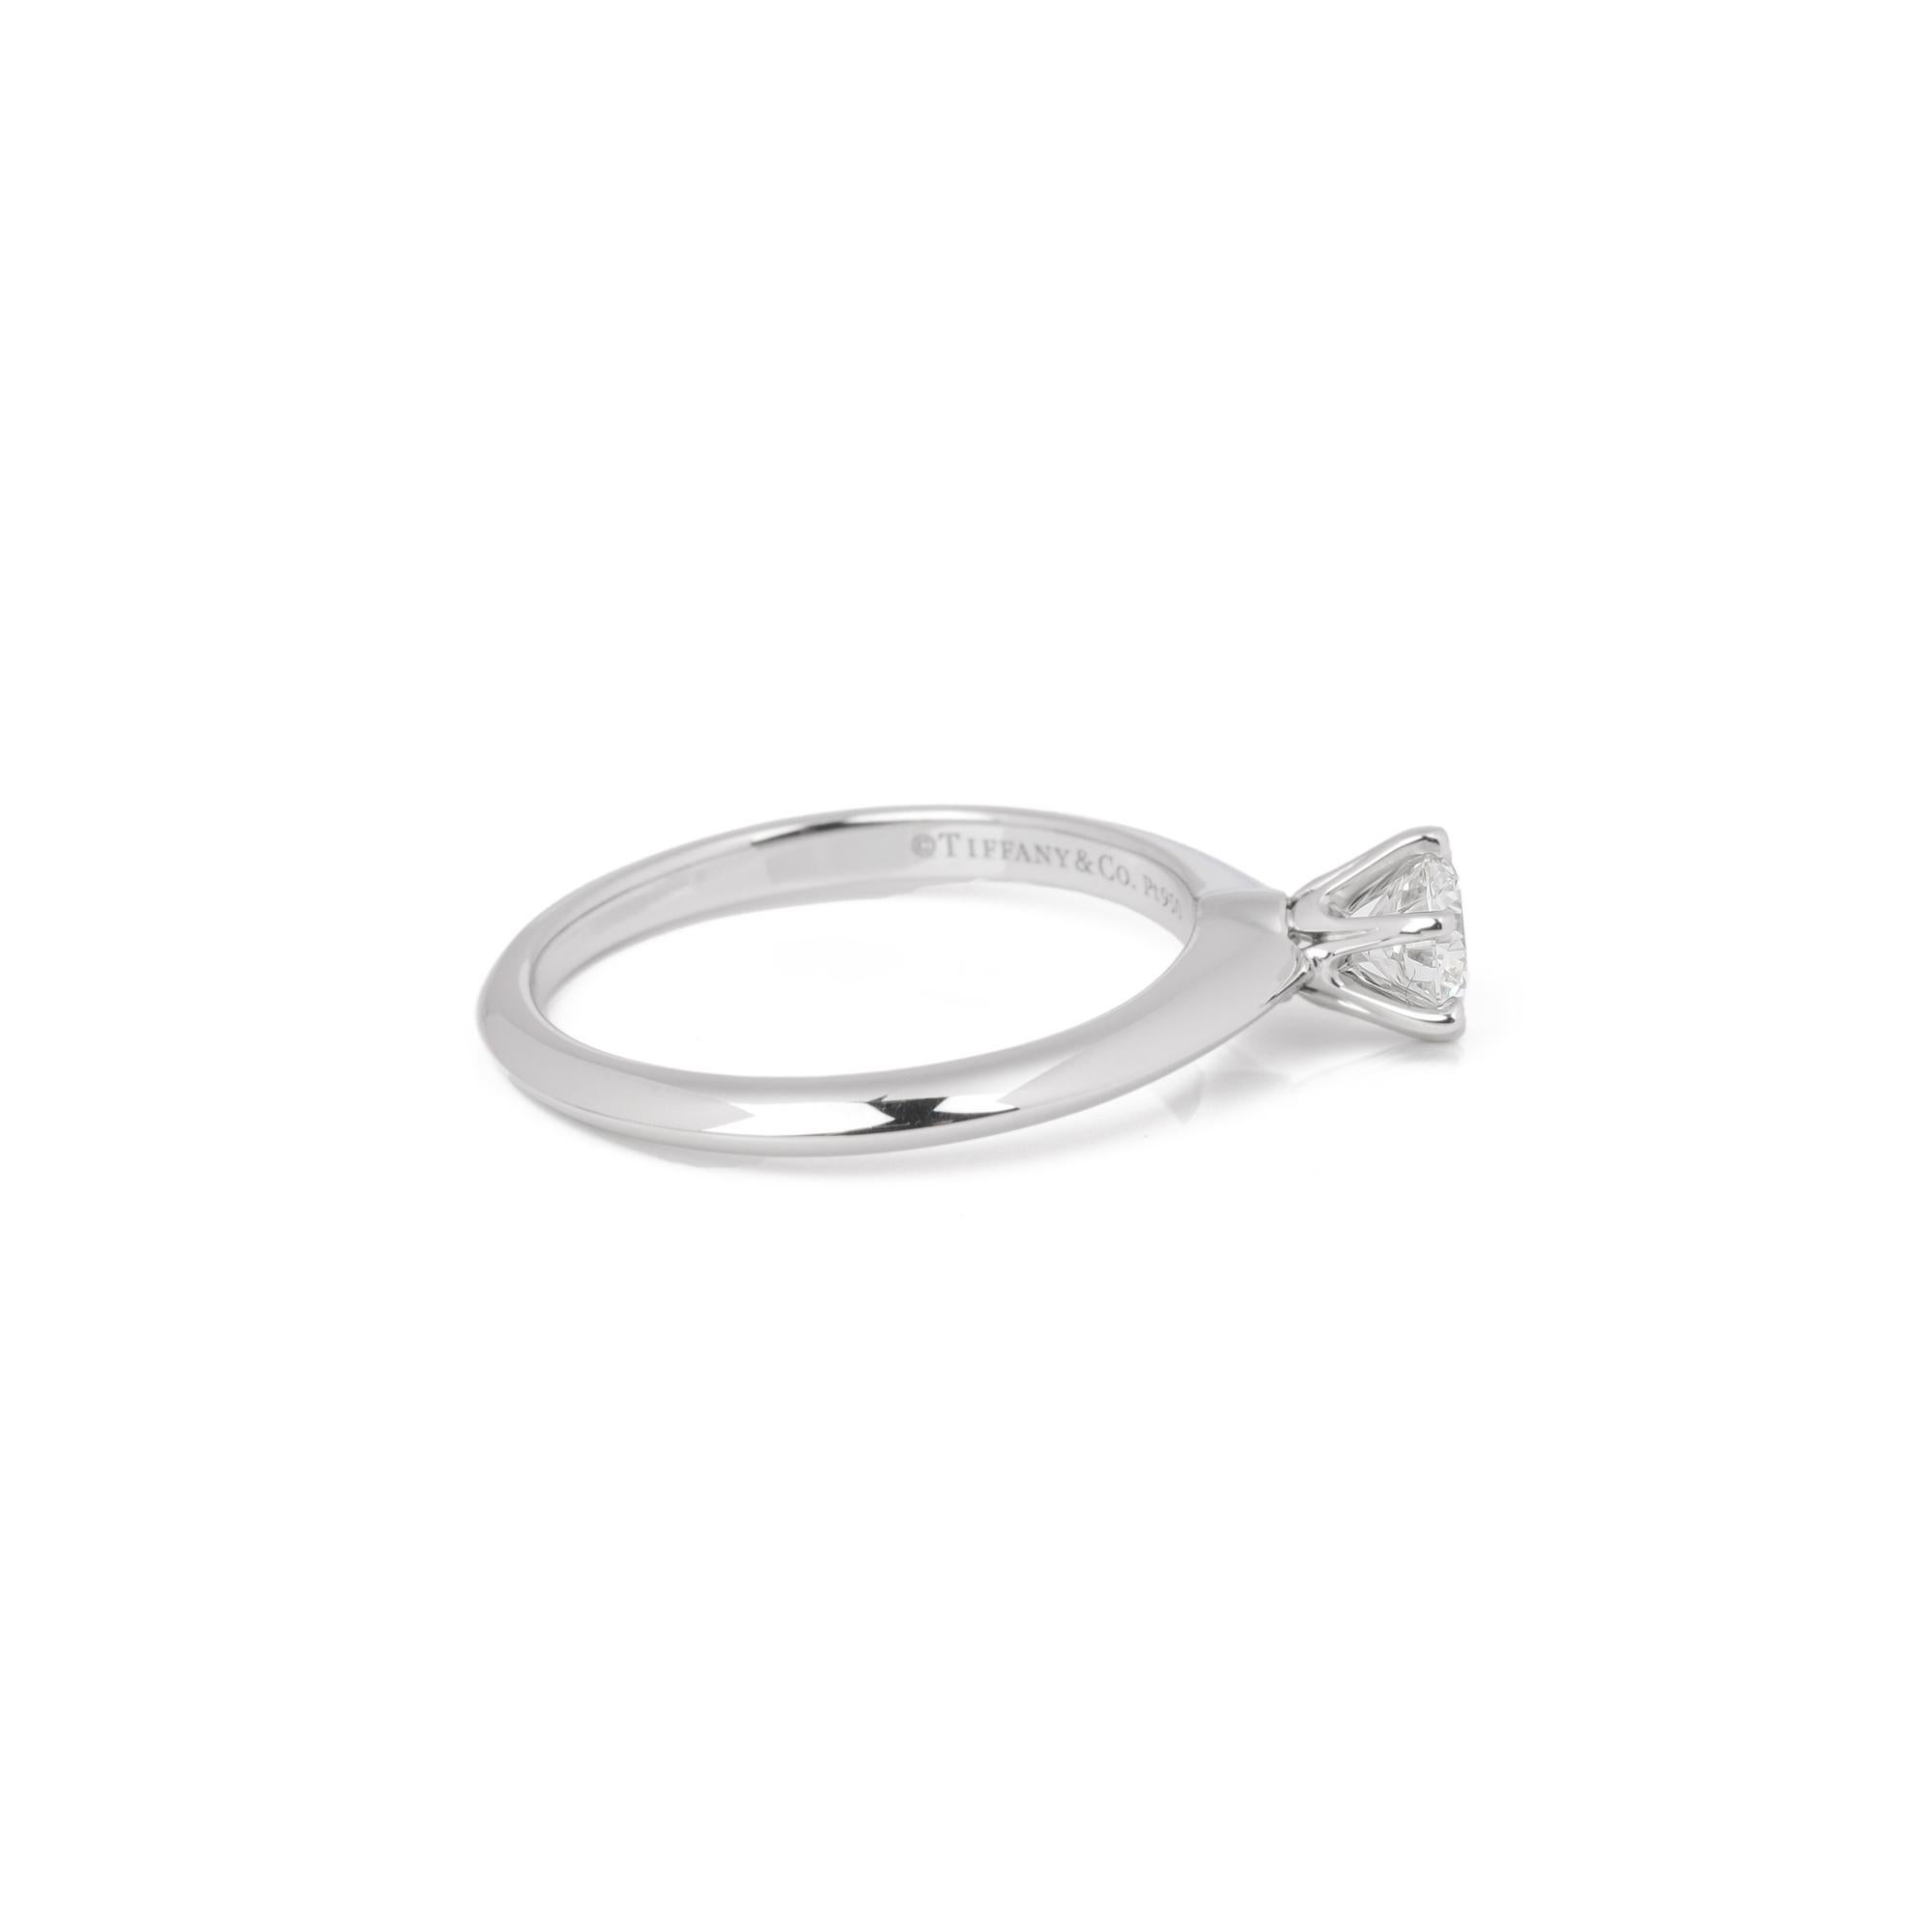 ITEM CONDITION	Excellent
MANUFACTURER	Tiffany & Co.
MODEL	Tiffany Setting
GENDER	Women's
ACCOMPANIED BY	Box and certificate
UK RING SIZE	K
EU RING SIZE	50
US RING SIZE	5.25
BAND WIDTH	2mm
TOTAL WEIGHT	3.6g
PRIMARY STONE QUANTITY	1
PRIMARY STONE